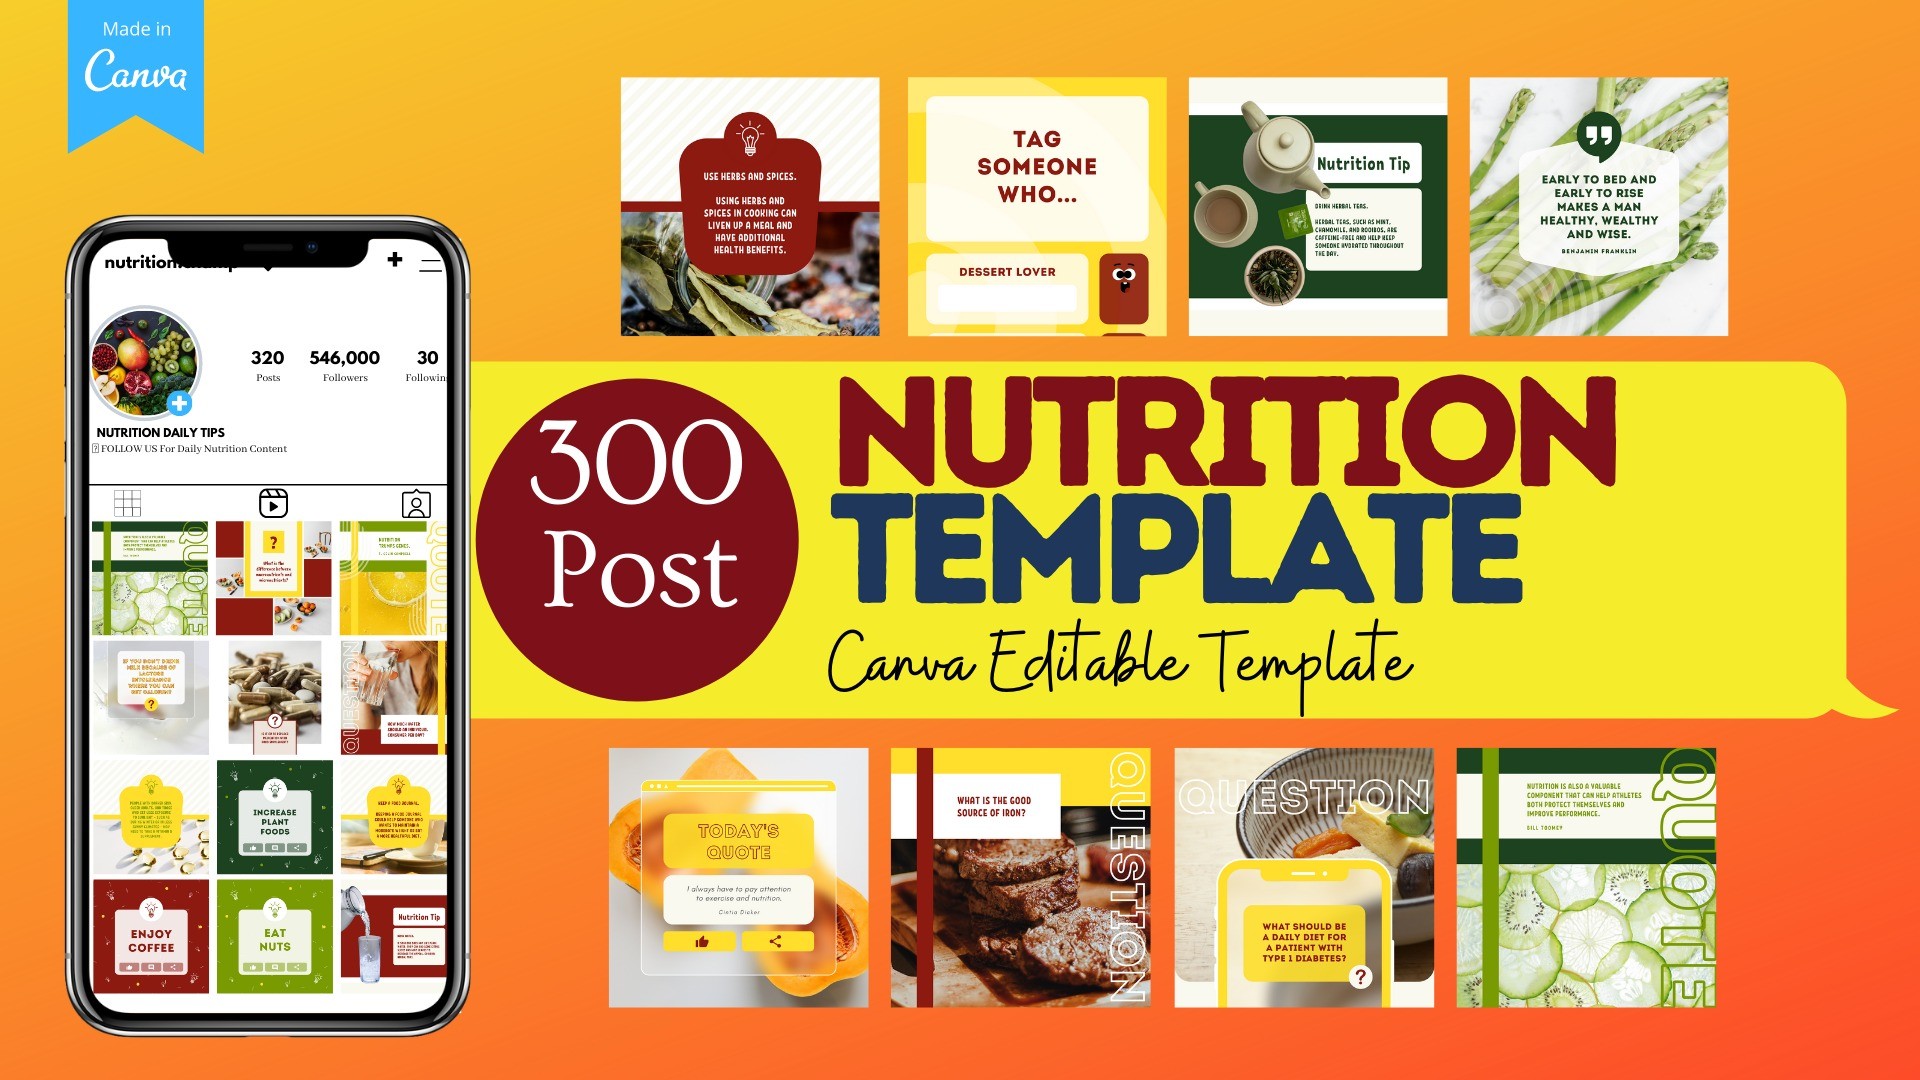 AppSumo Deal for Nutrition Template - Canva Editable Posts